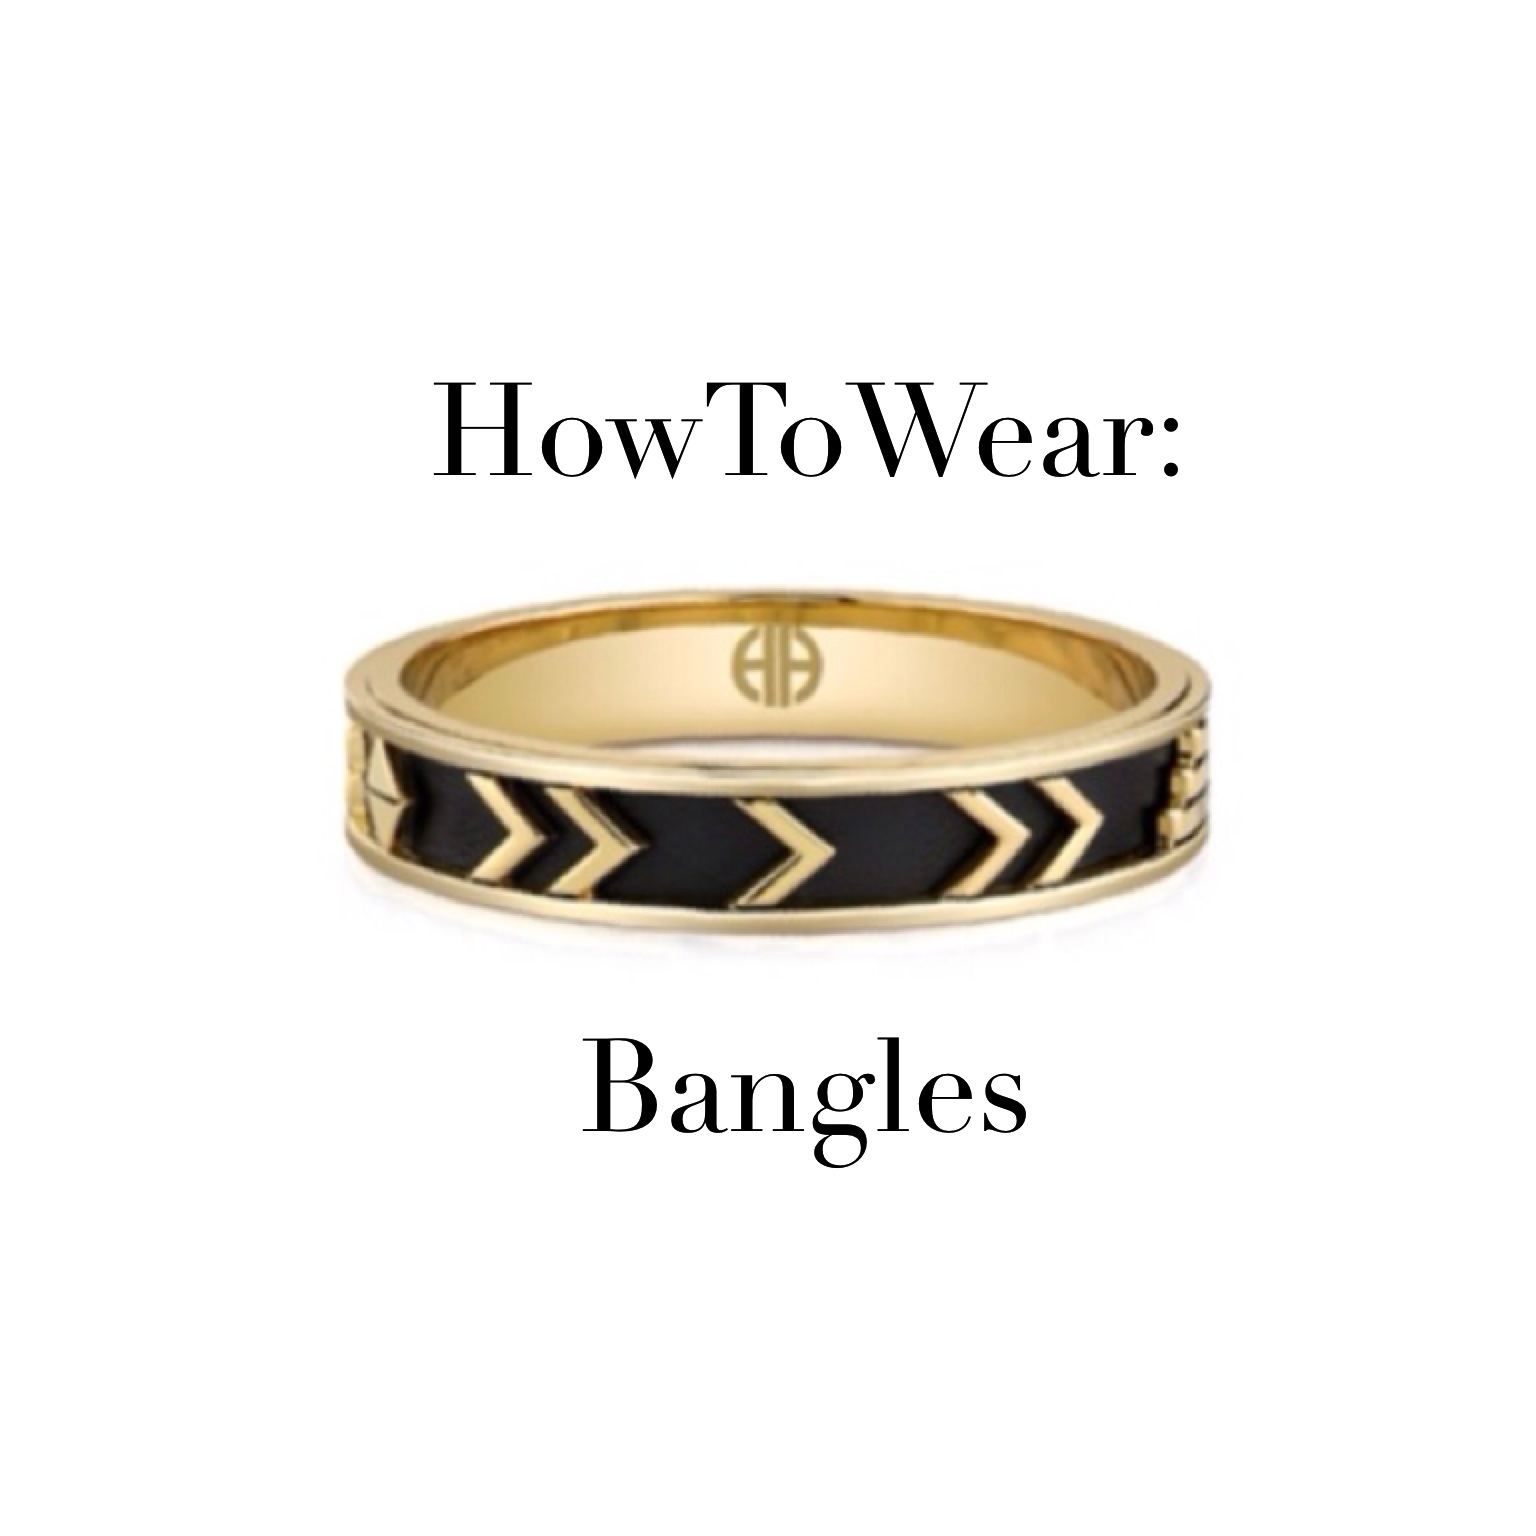 How To Wear: Bangles